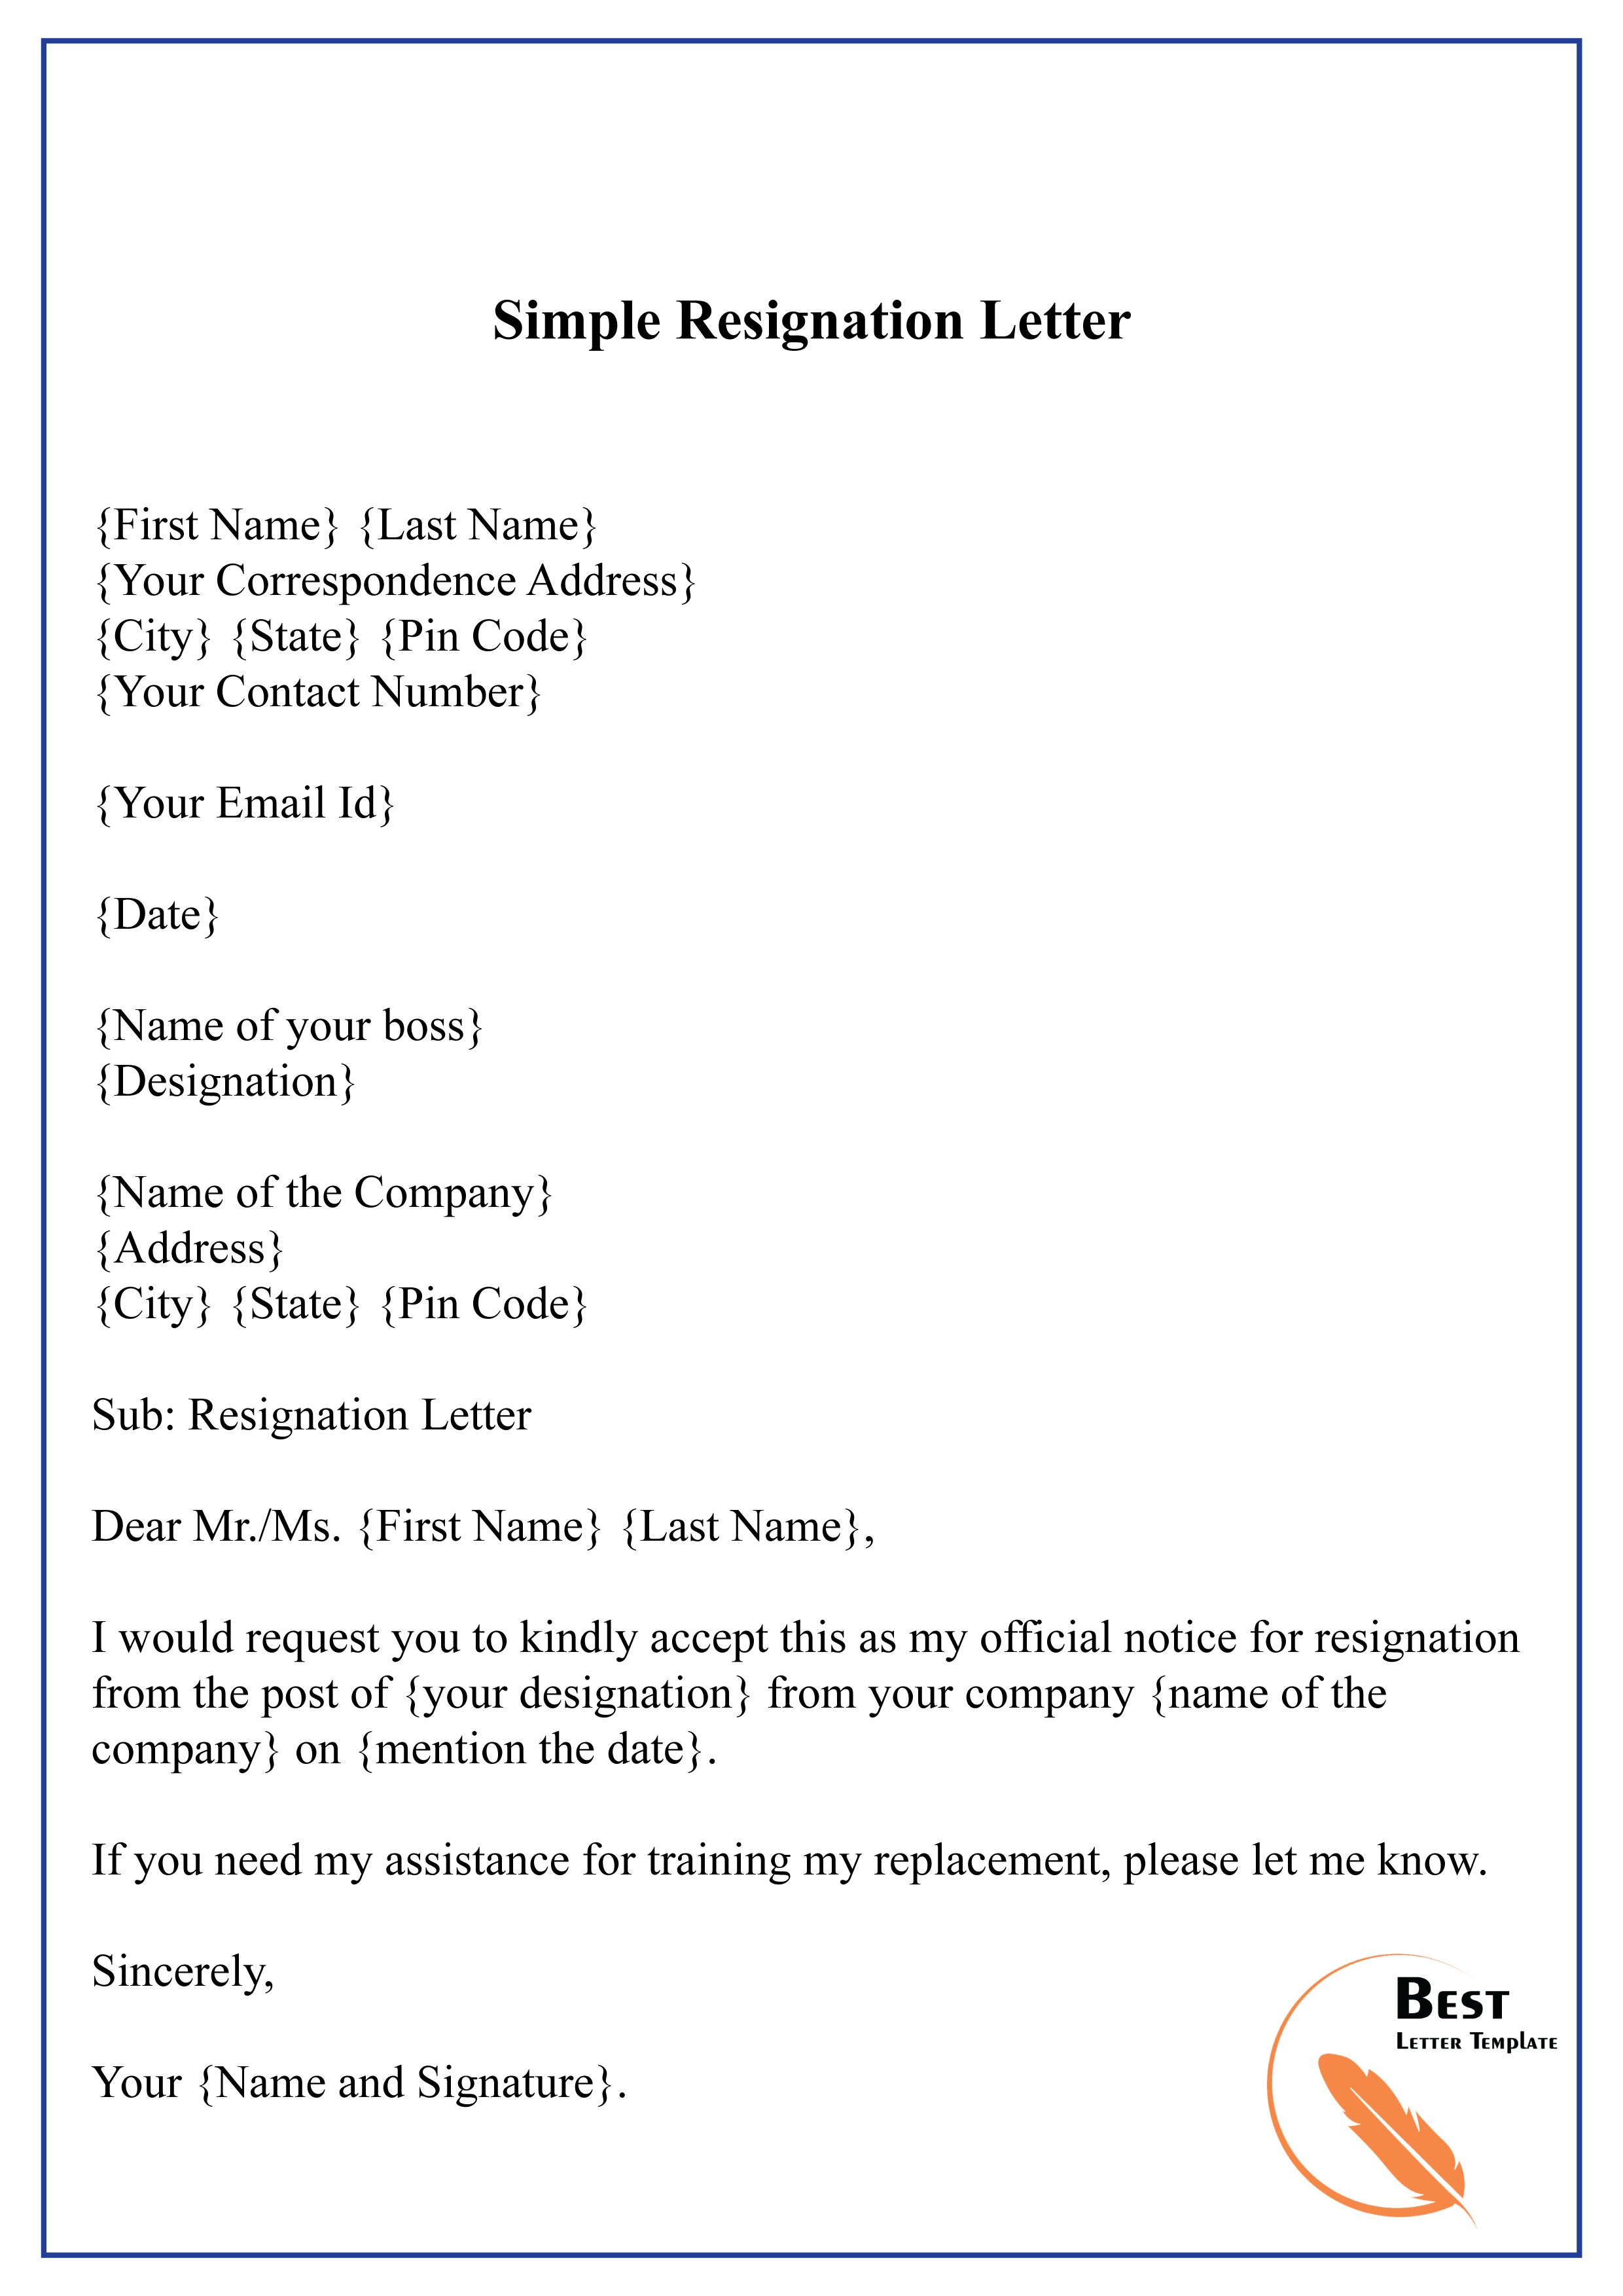 Template For A Resignation Letter from bestlettertemplate.com